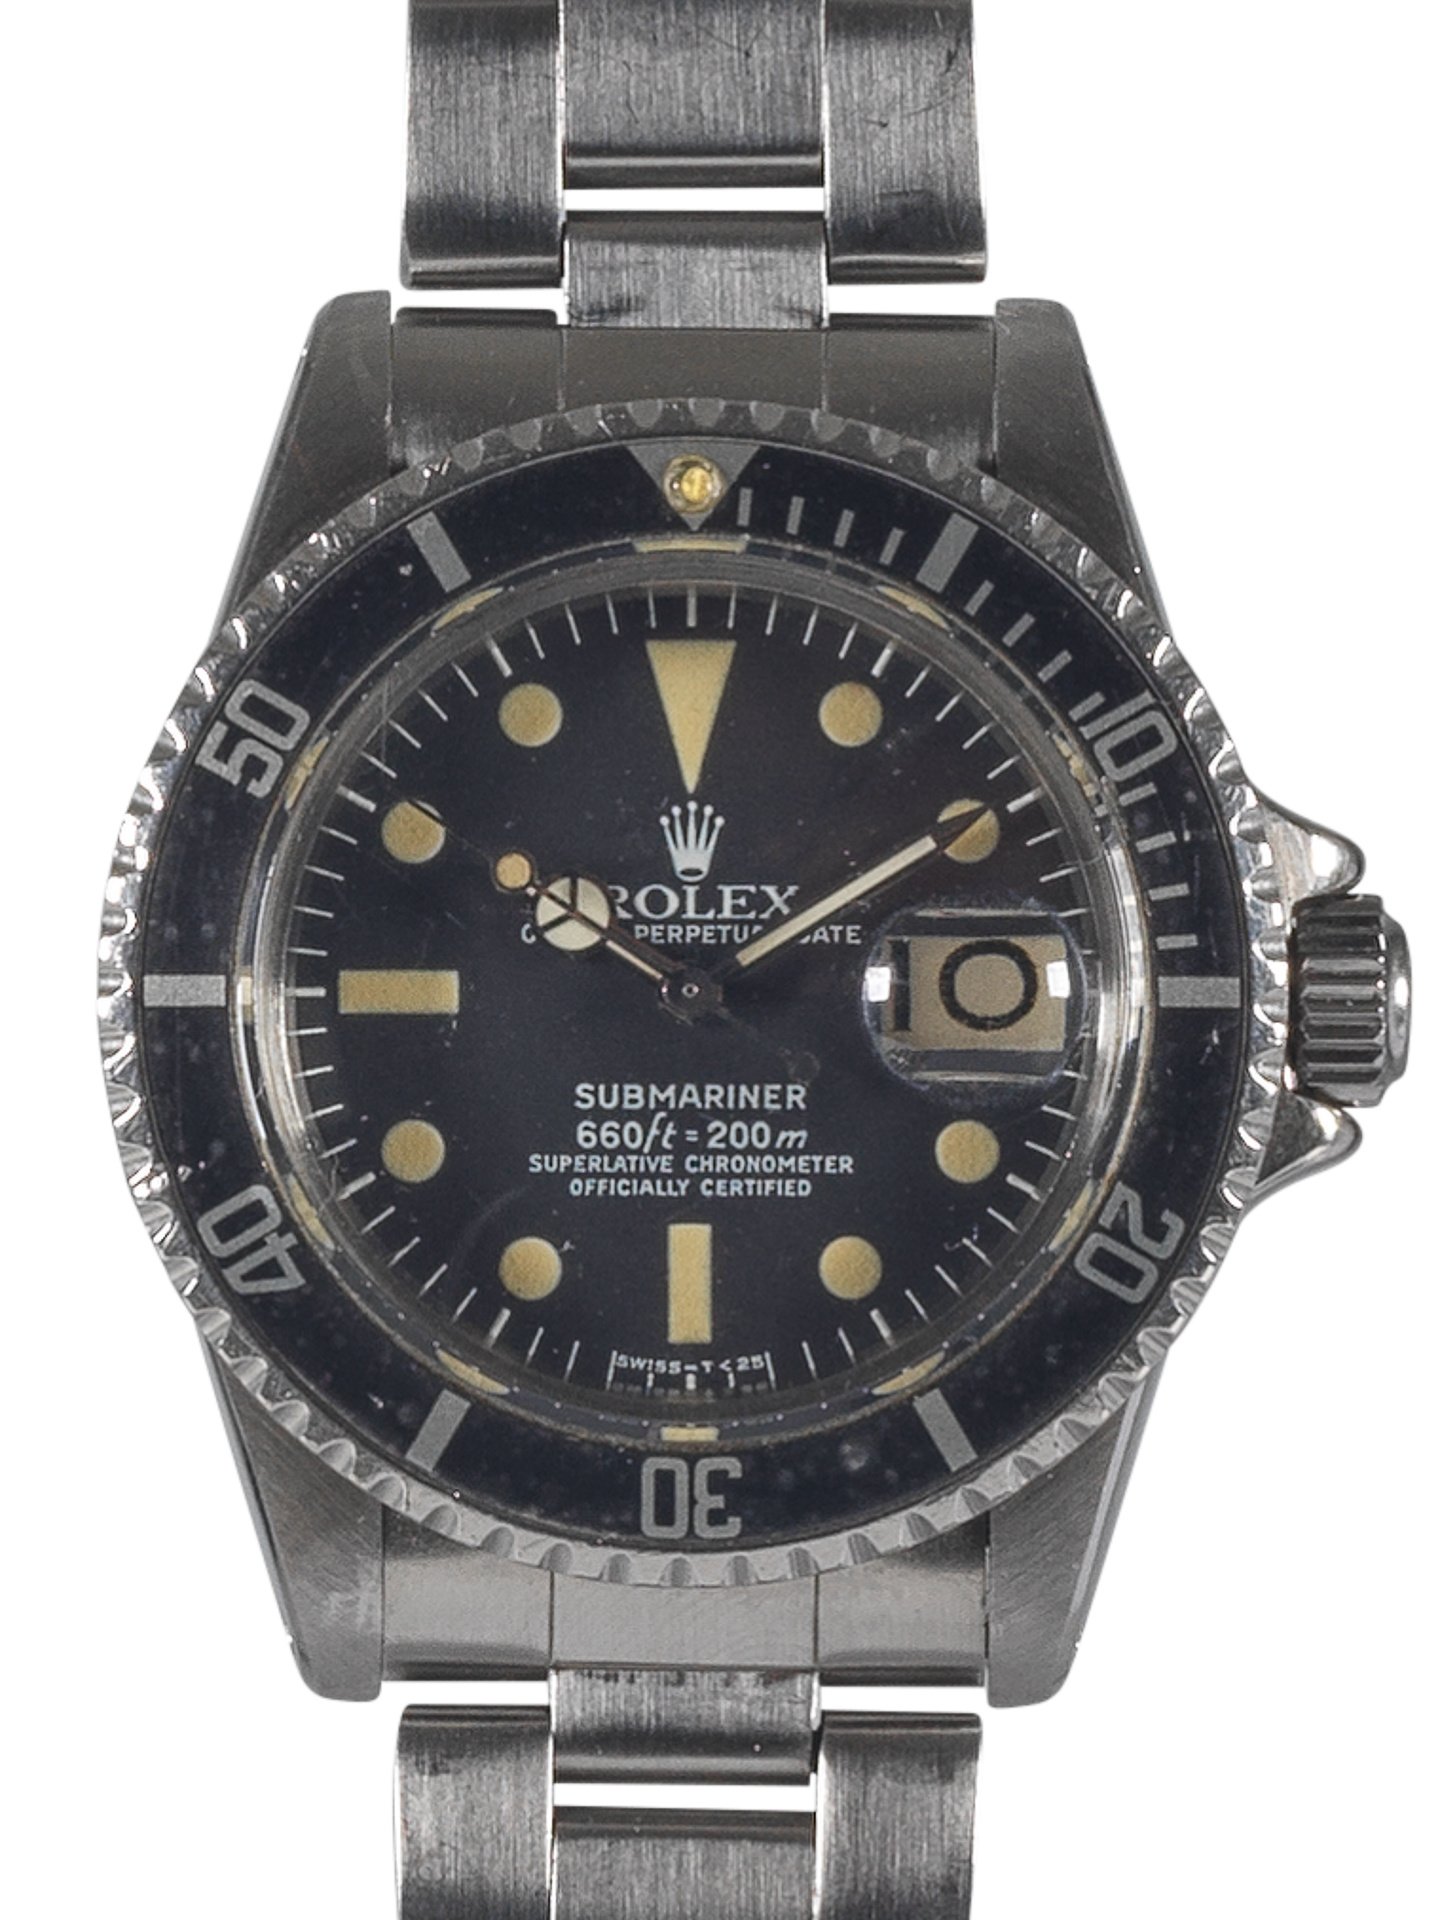 Vintage Rolex Submariner Oyster Perpetual Date Ref.1680 c.1978